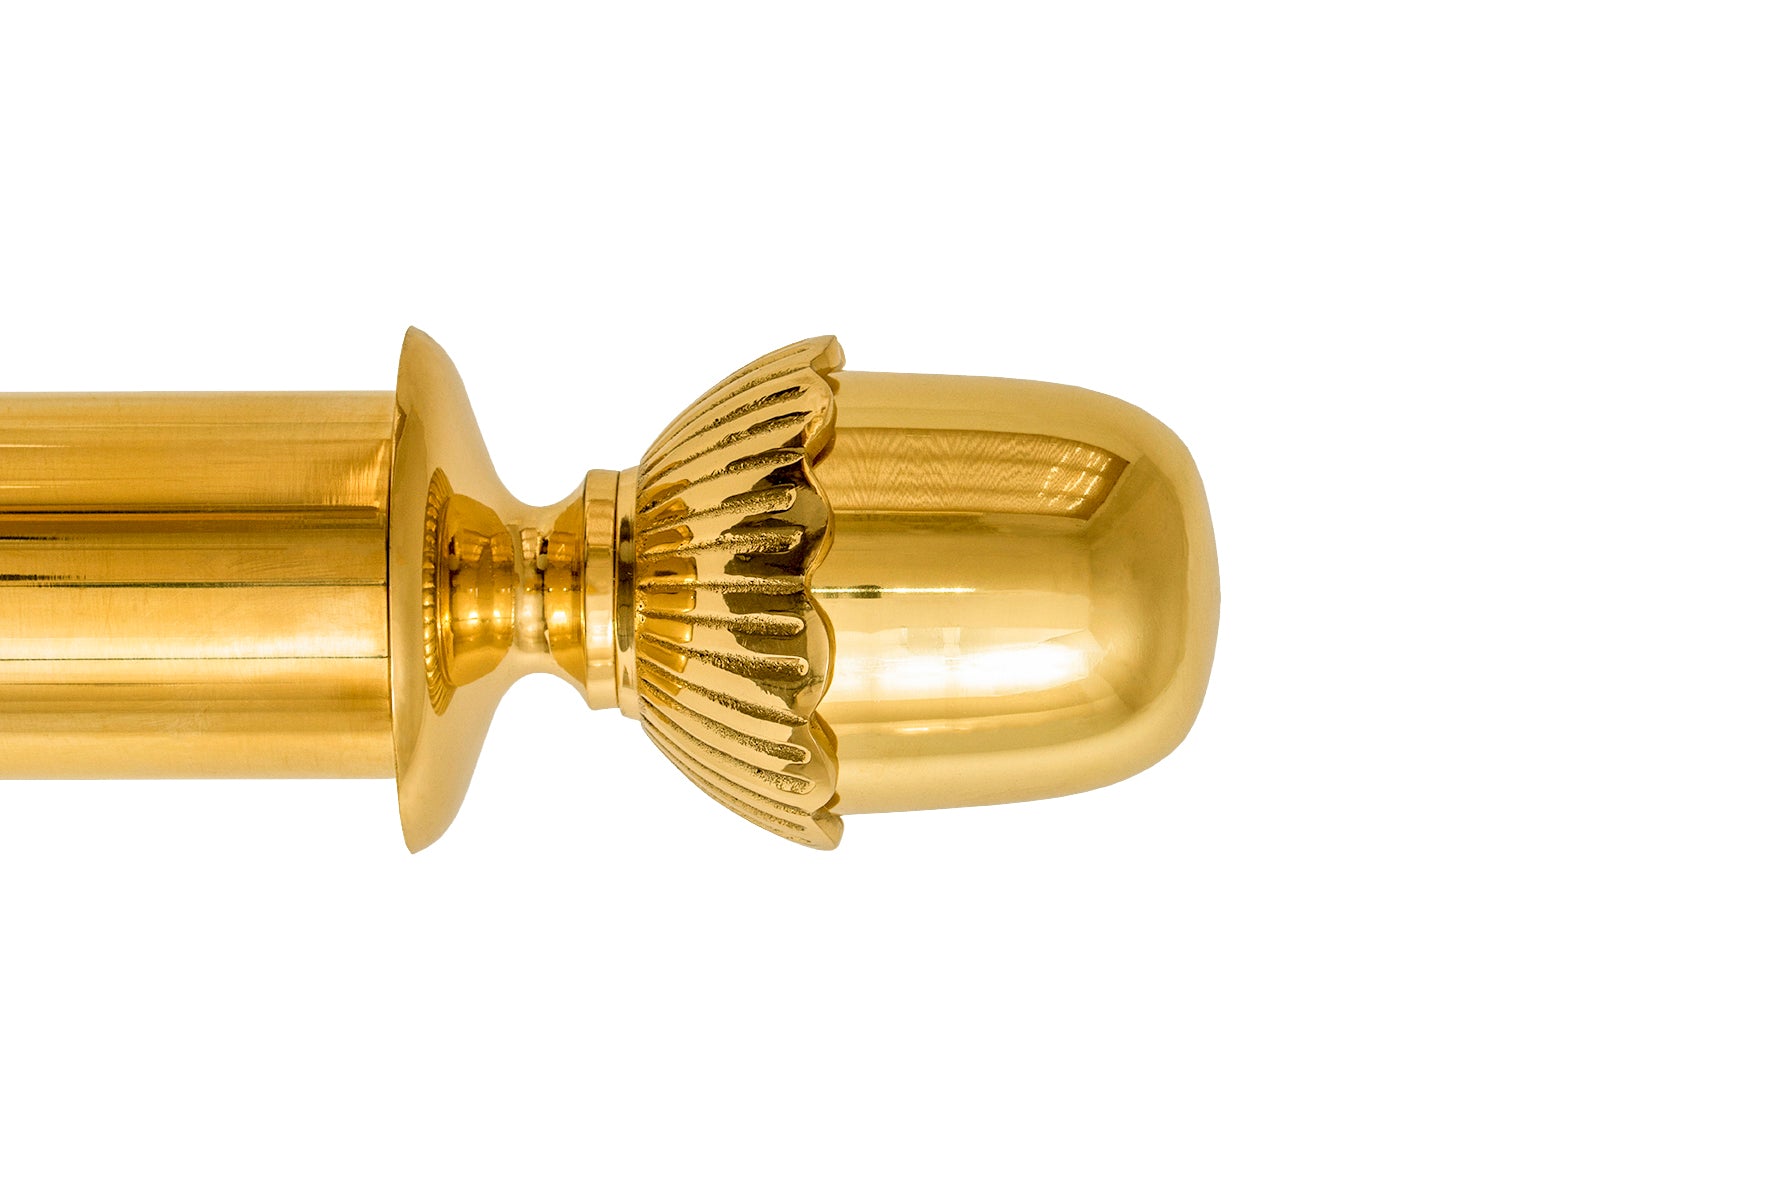 Tillys Classic Acorn Finial Curtain Pole Set in Polished Brass